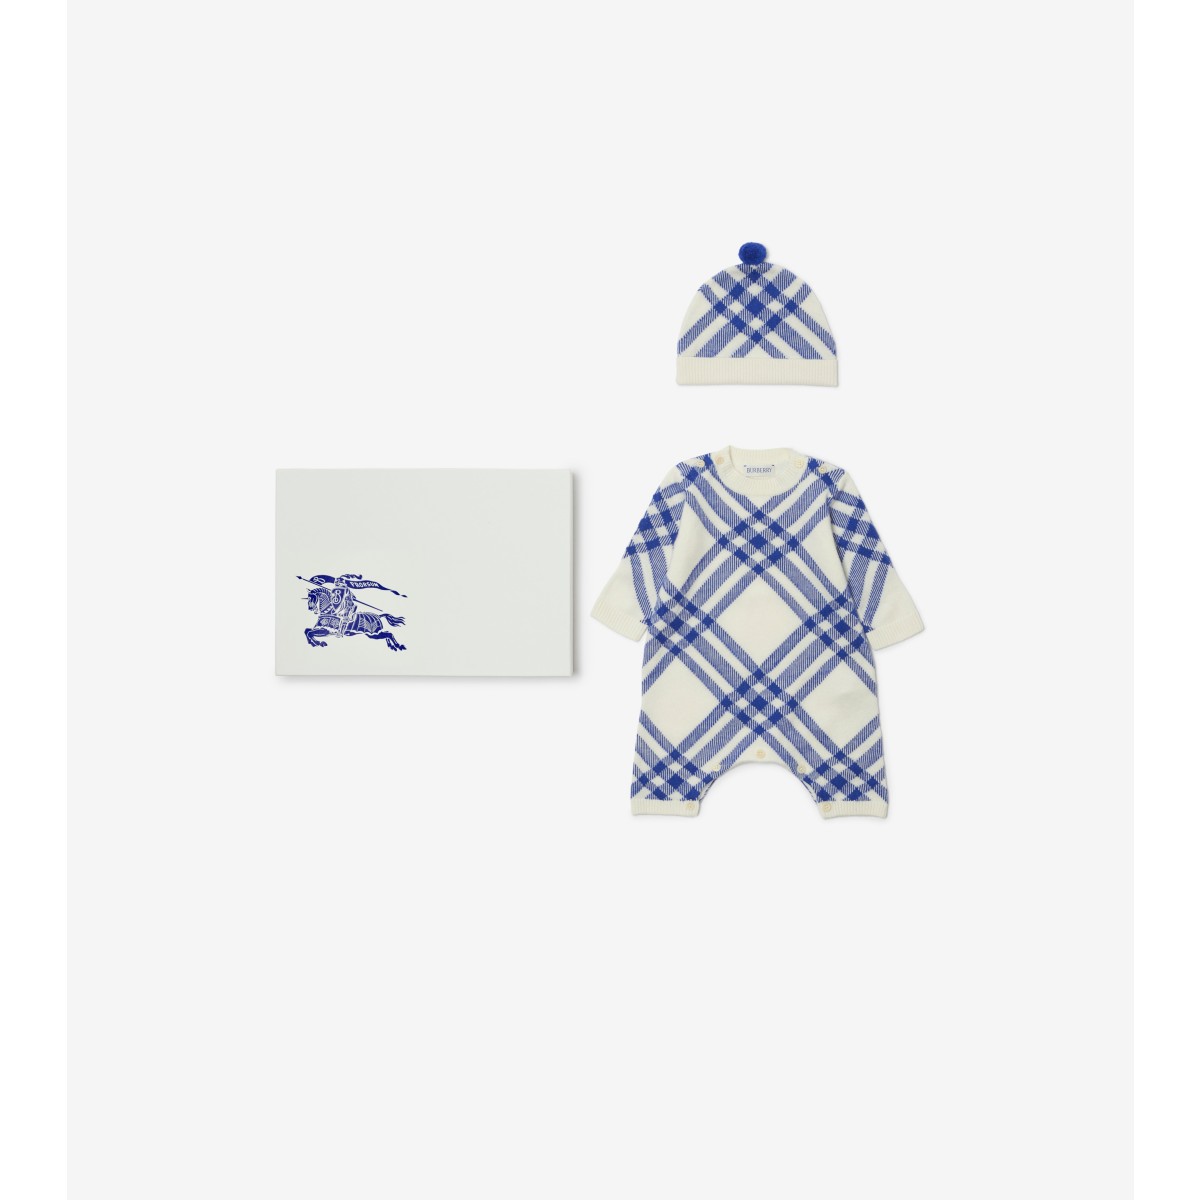 Burberry Childrens Check Two-piece Baby Gift Set